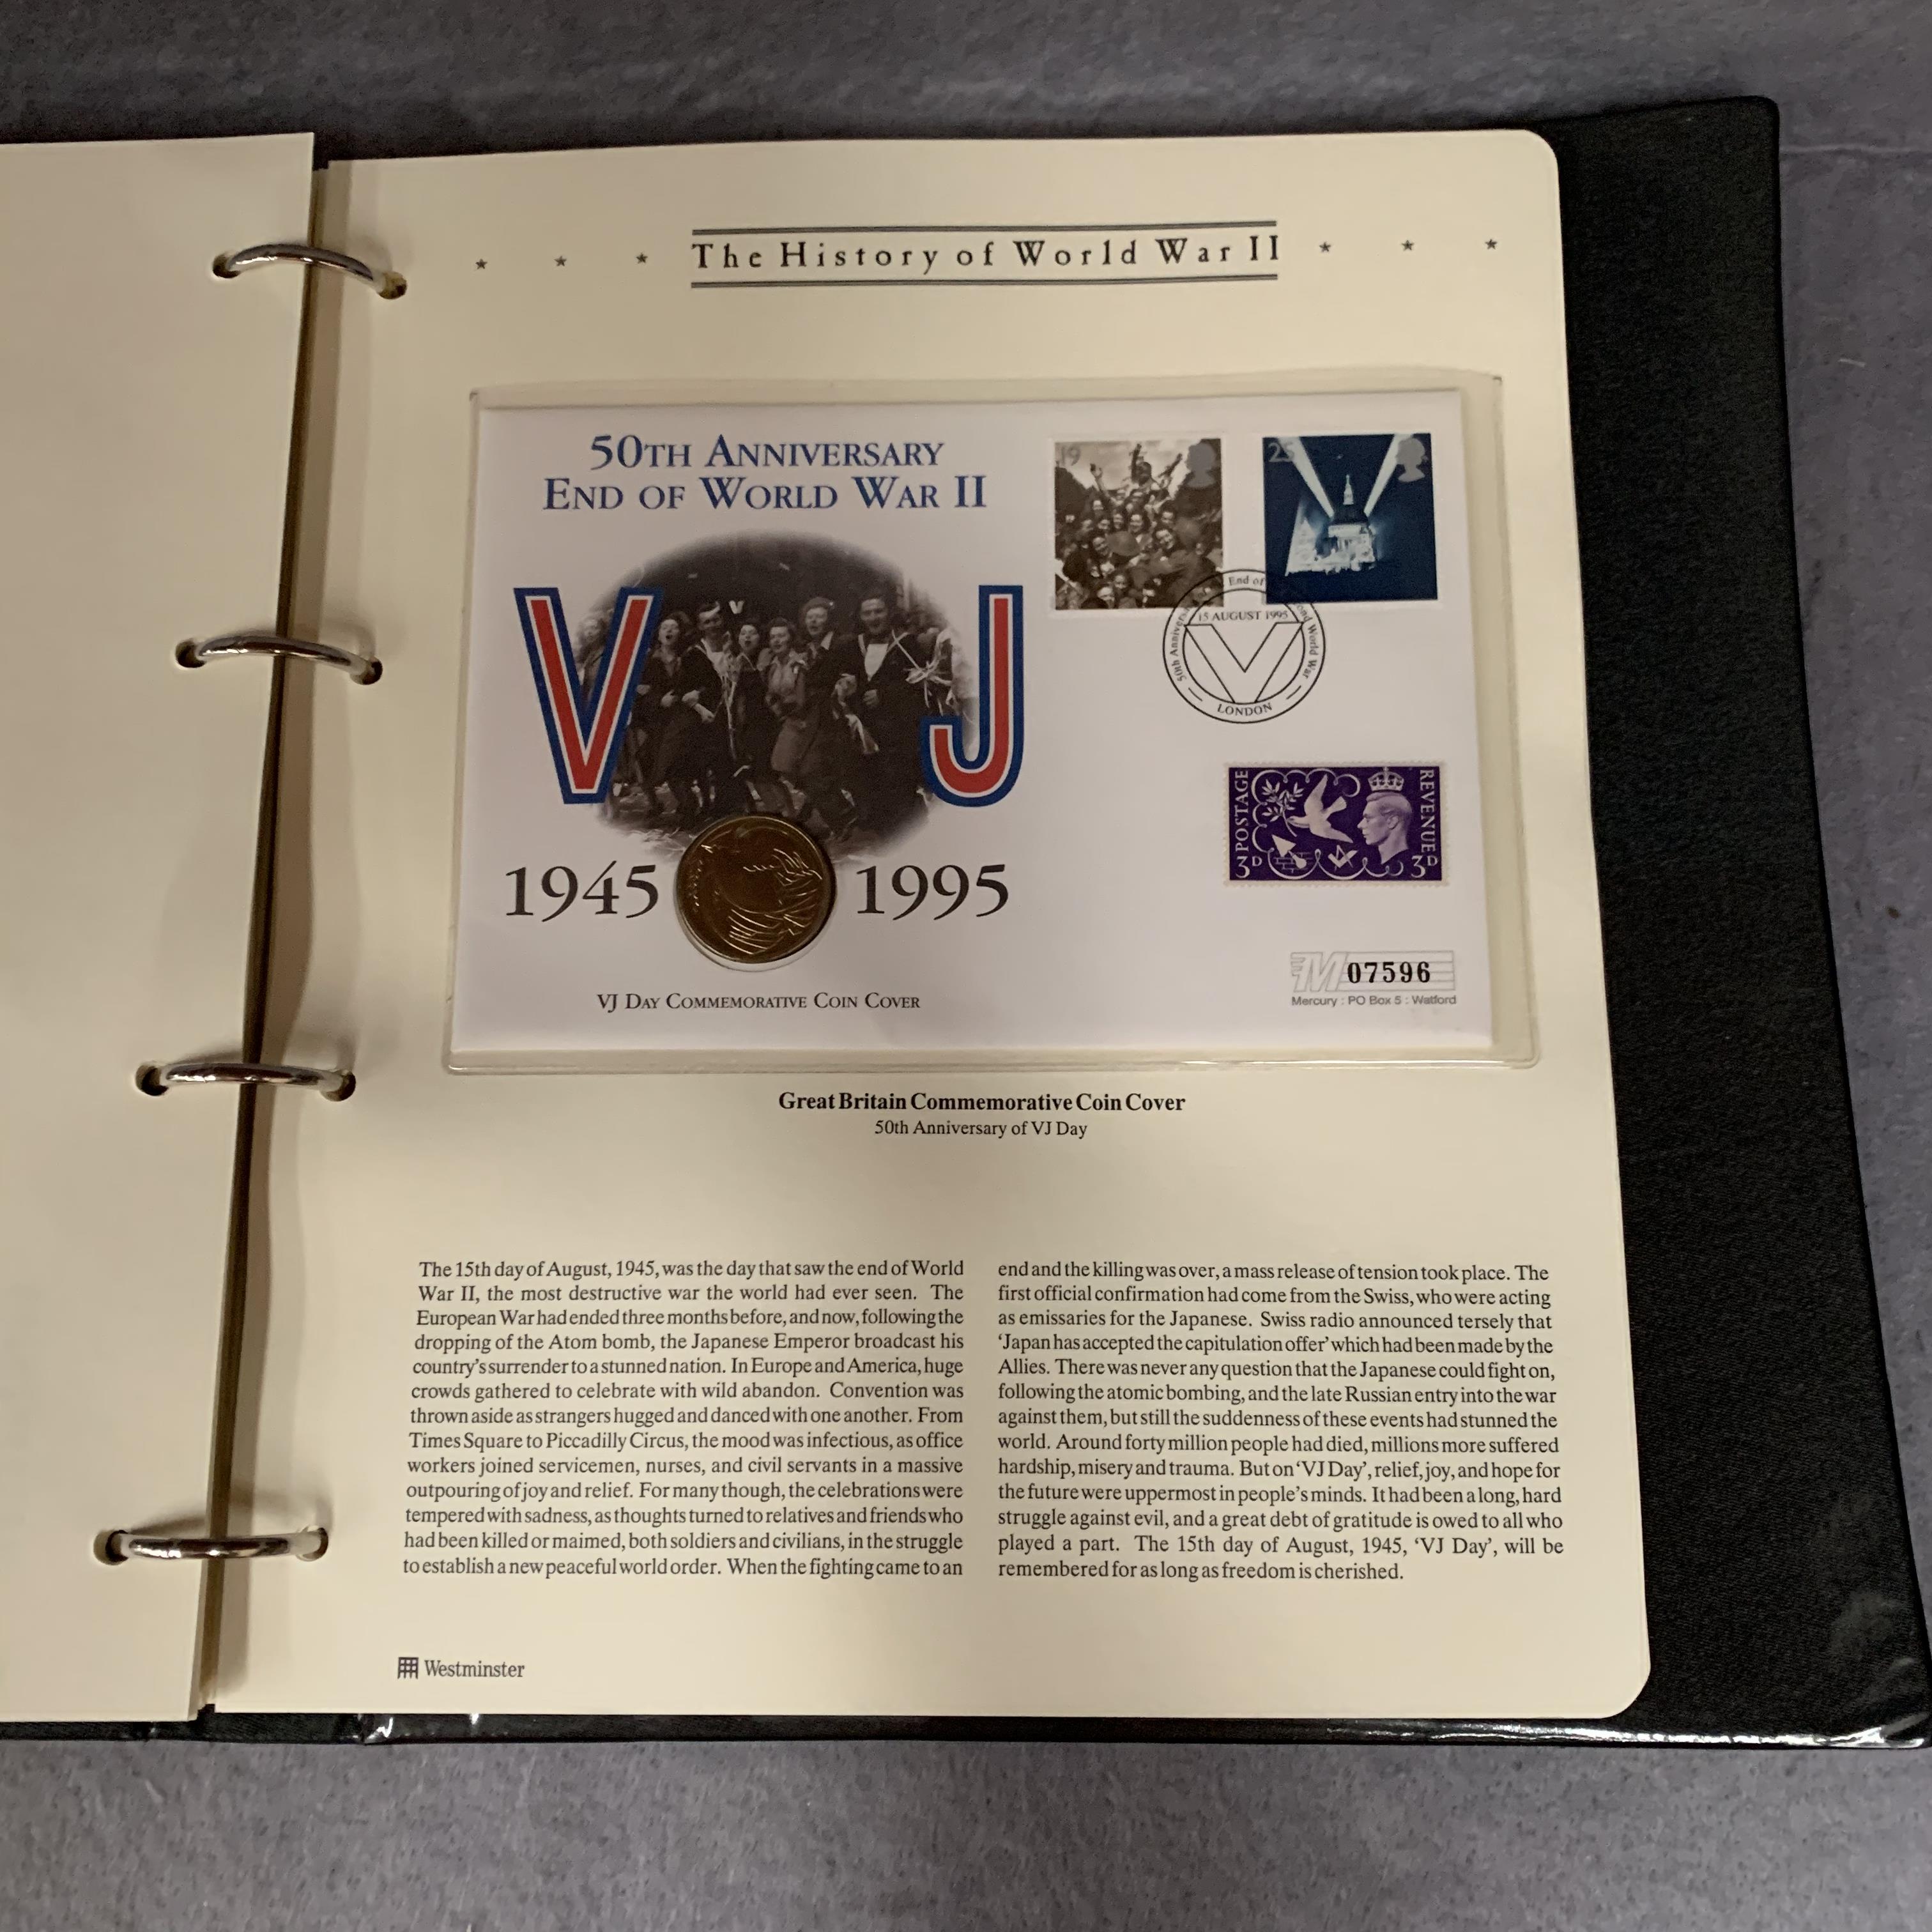 A Westminster album containing The History of World War II stamp and coin commemorative covers - Image 3 of 3